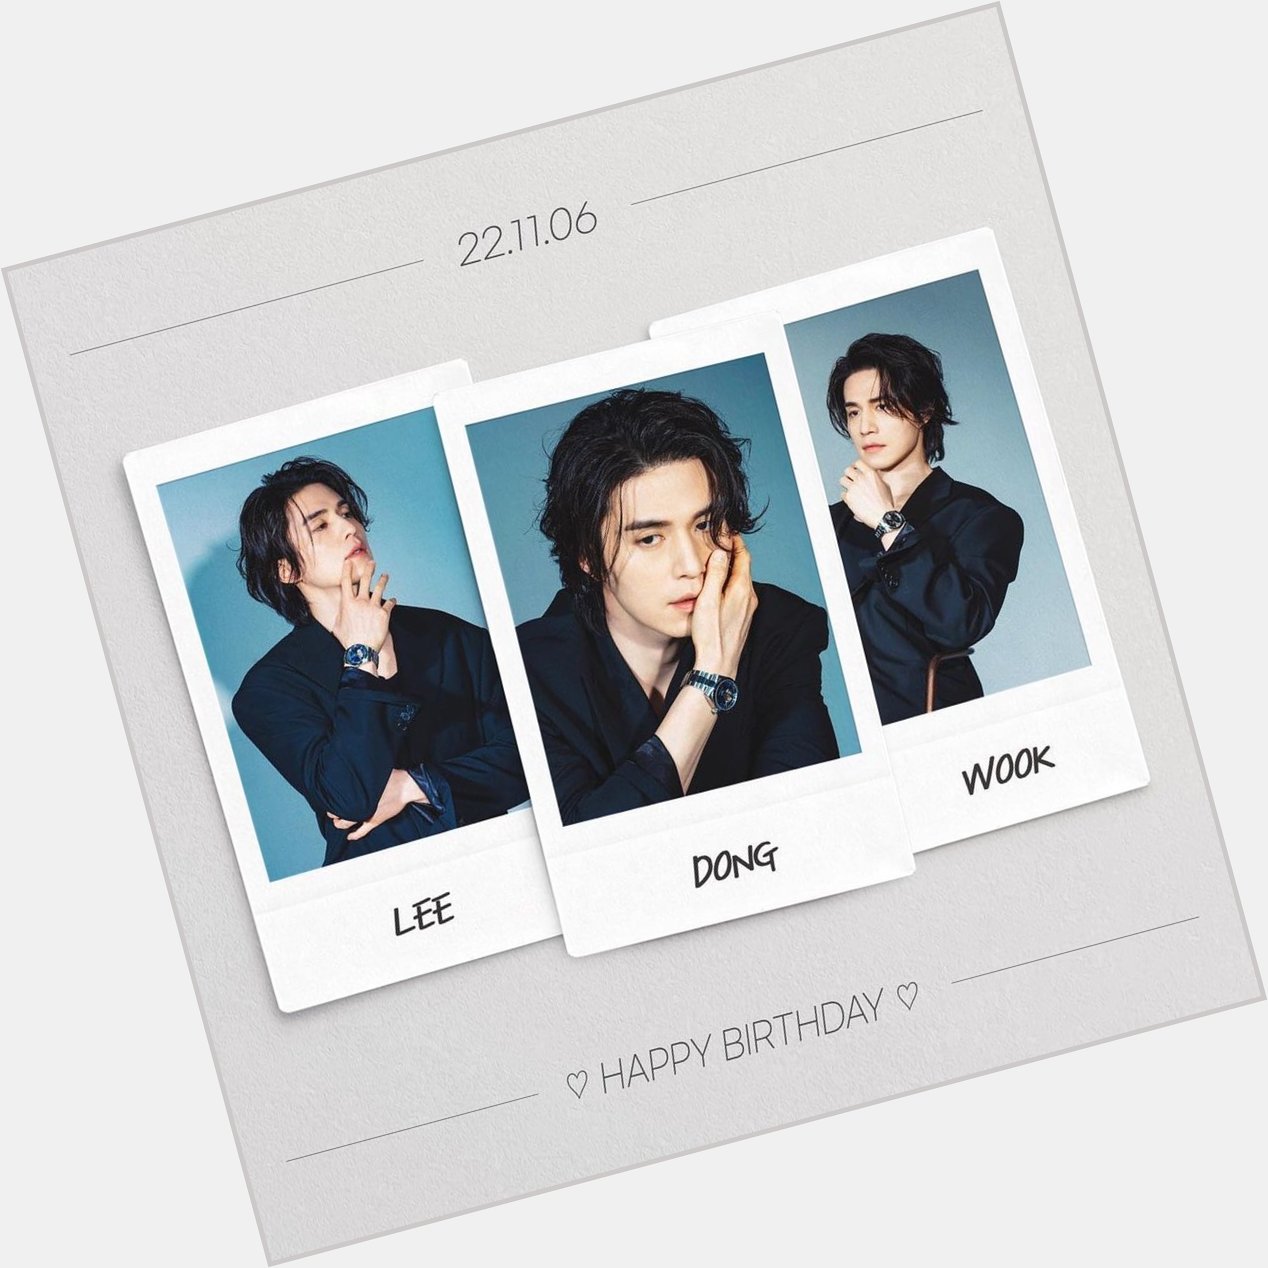 Happy birthday LEE DONG WOOK   